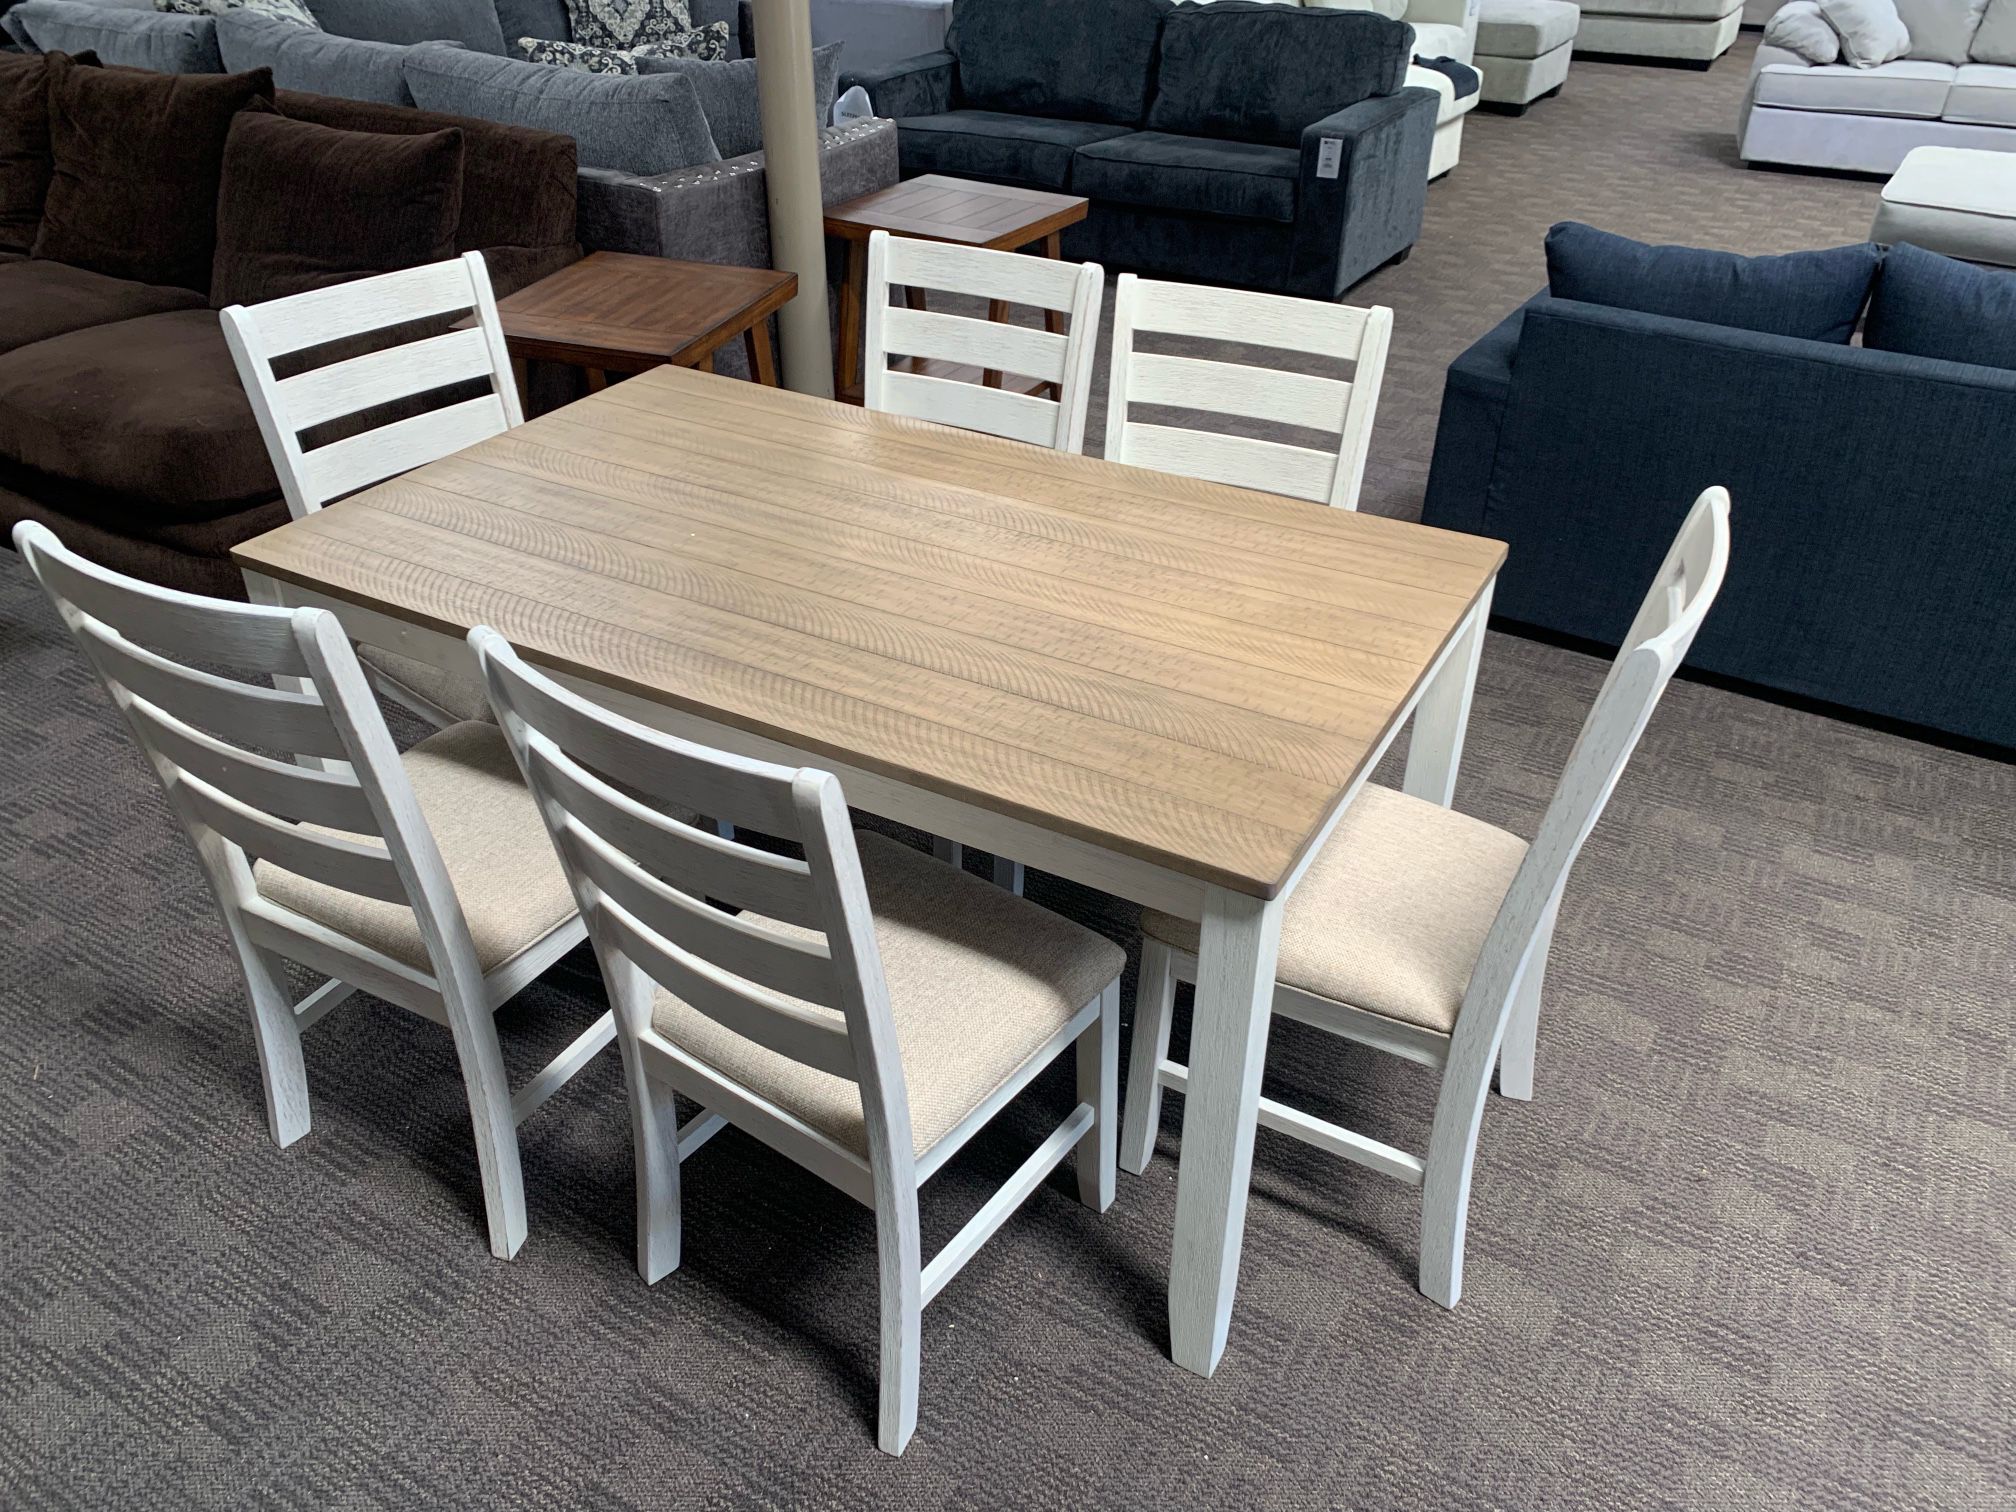 New White Dining Kitchen Table Set 